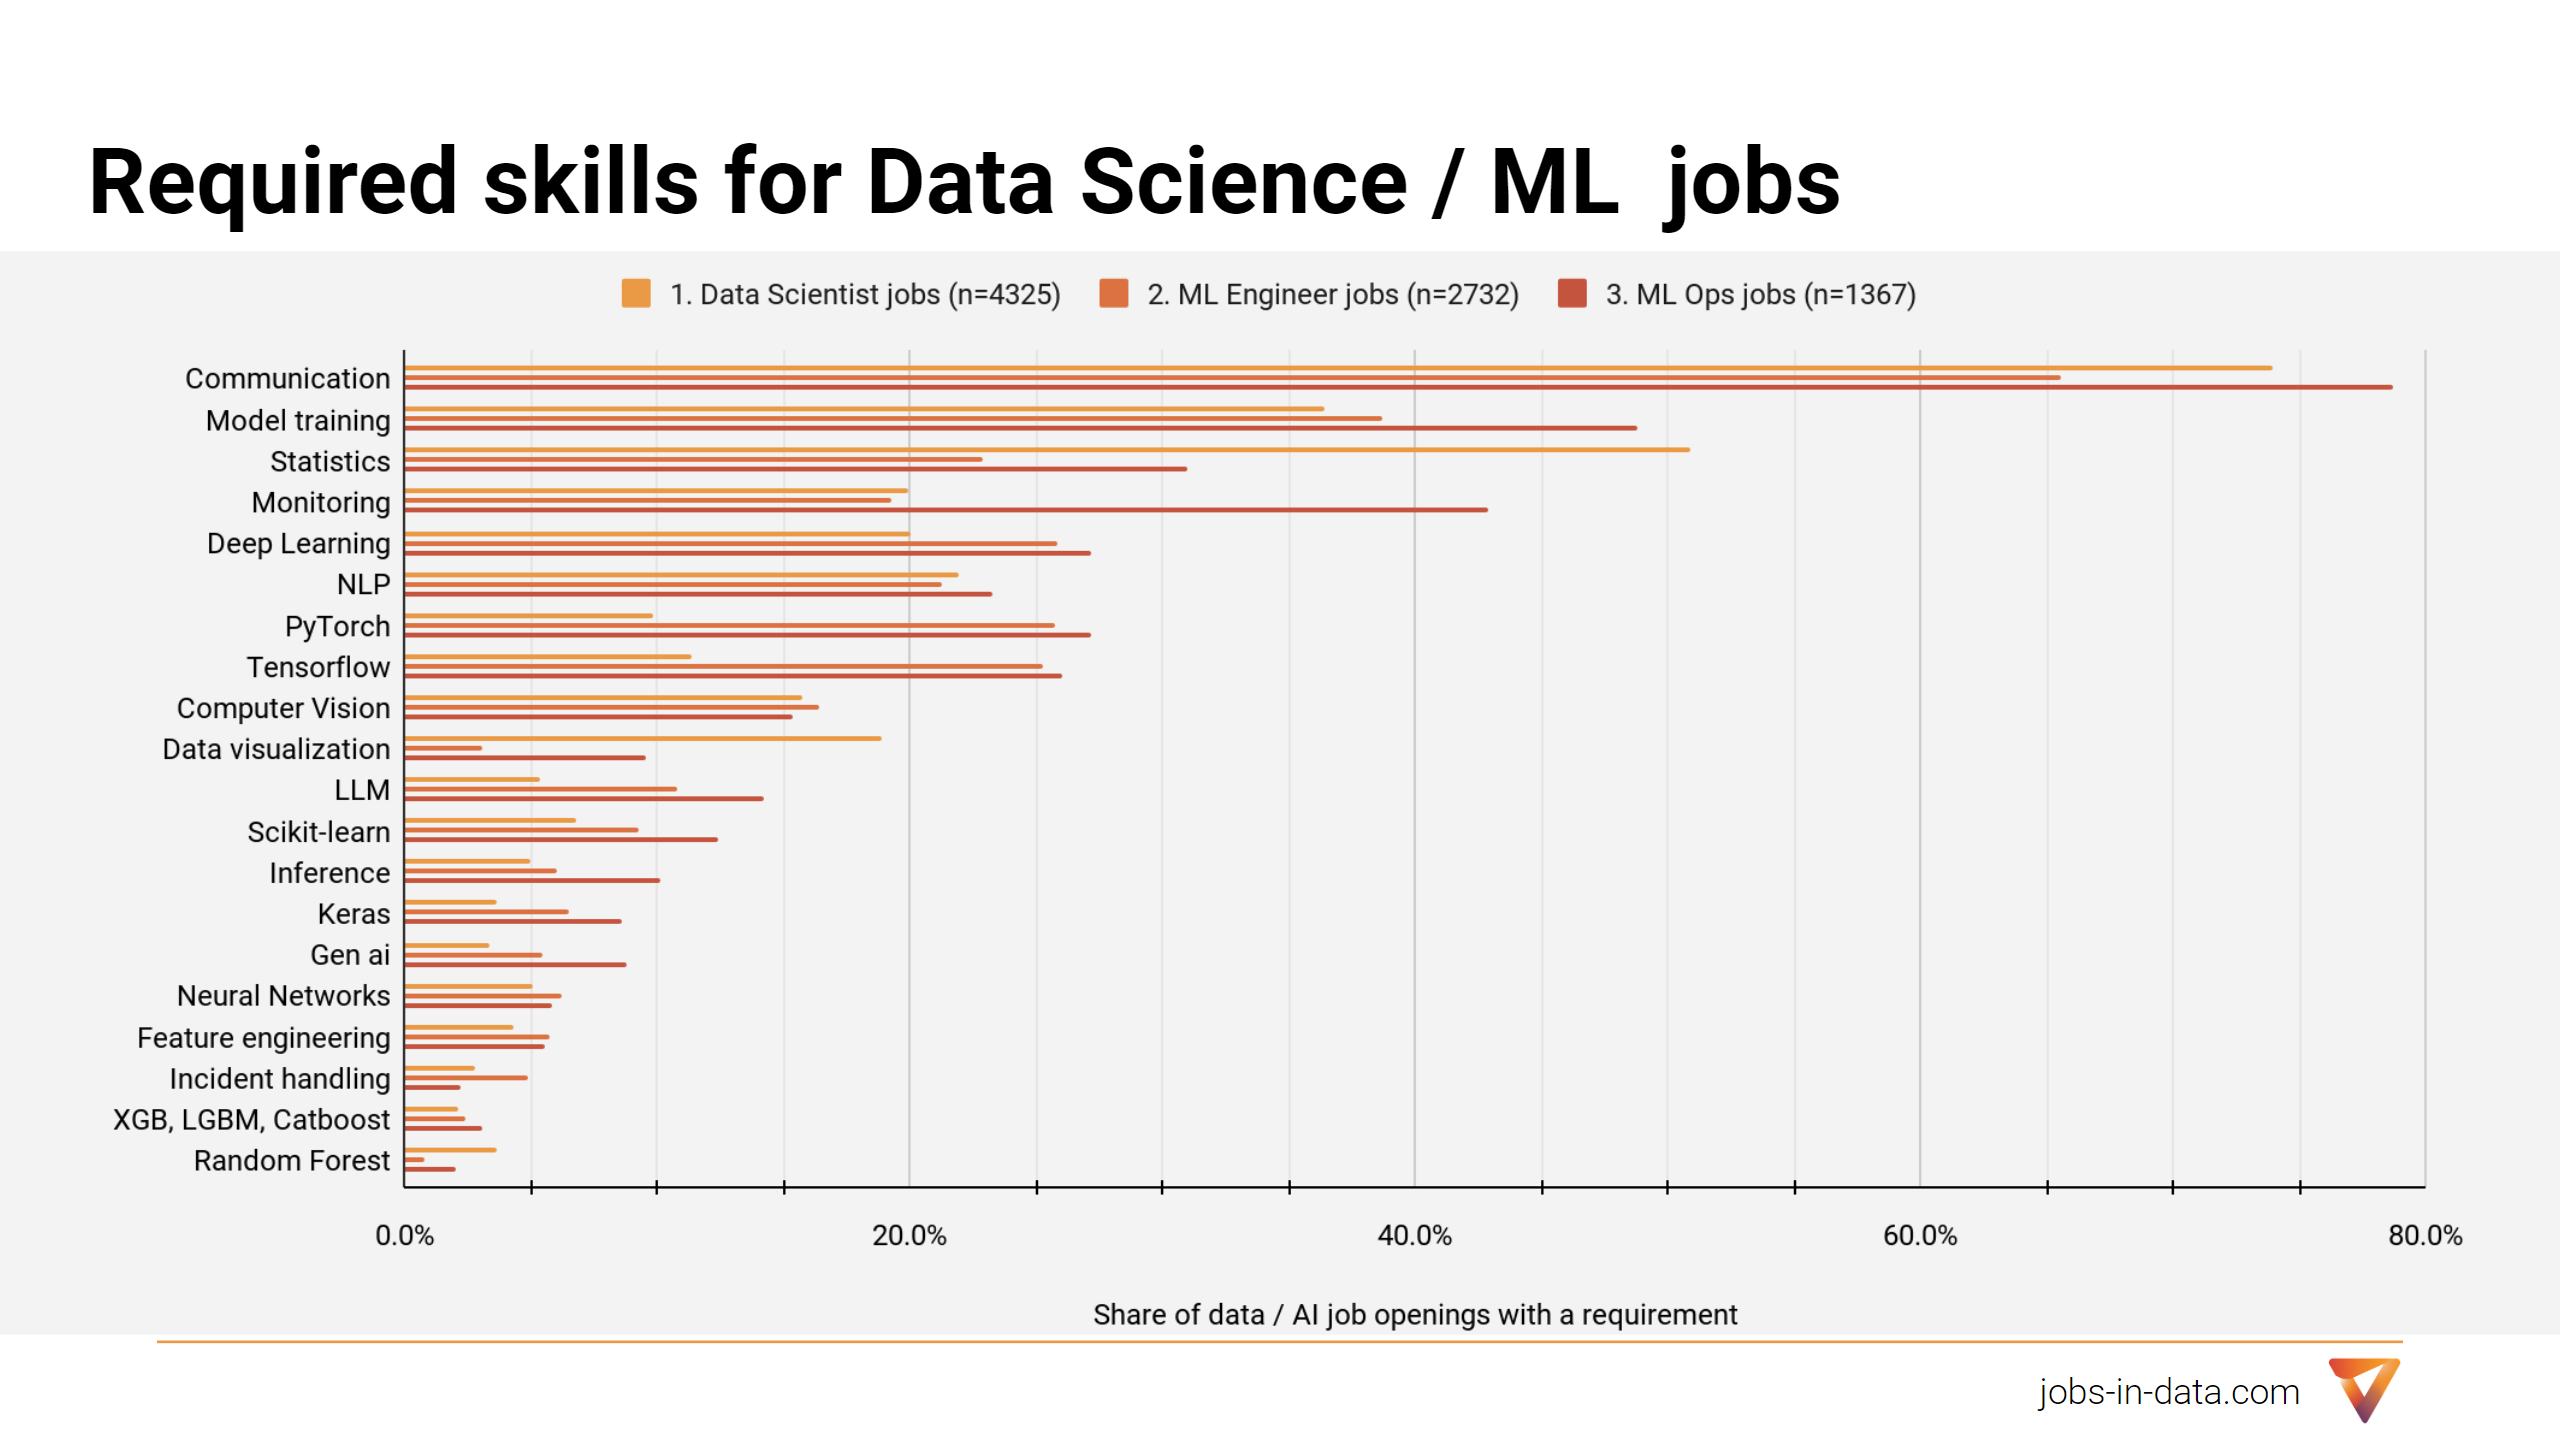 Required Core ML Skills for Data Science and Machine Learning jobs